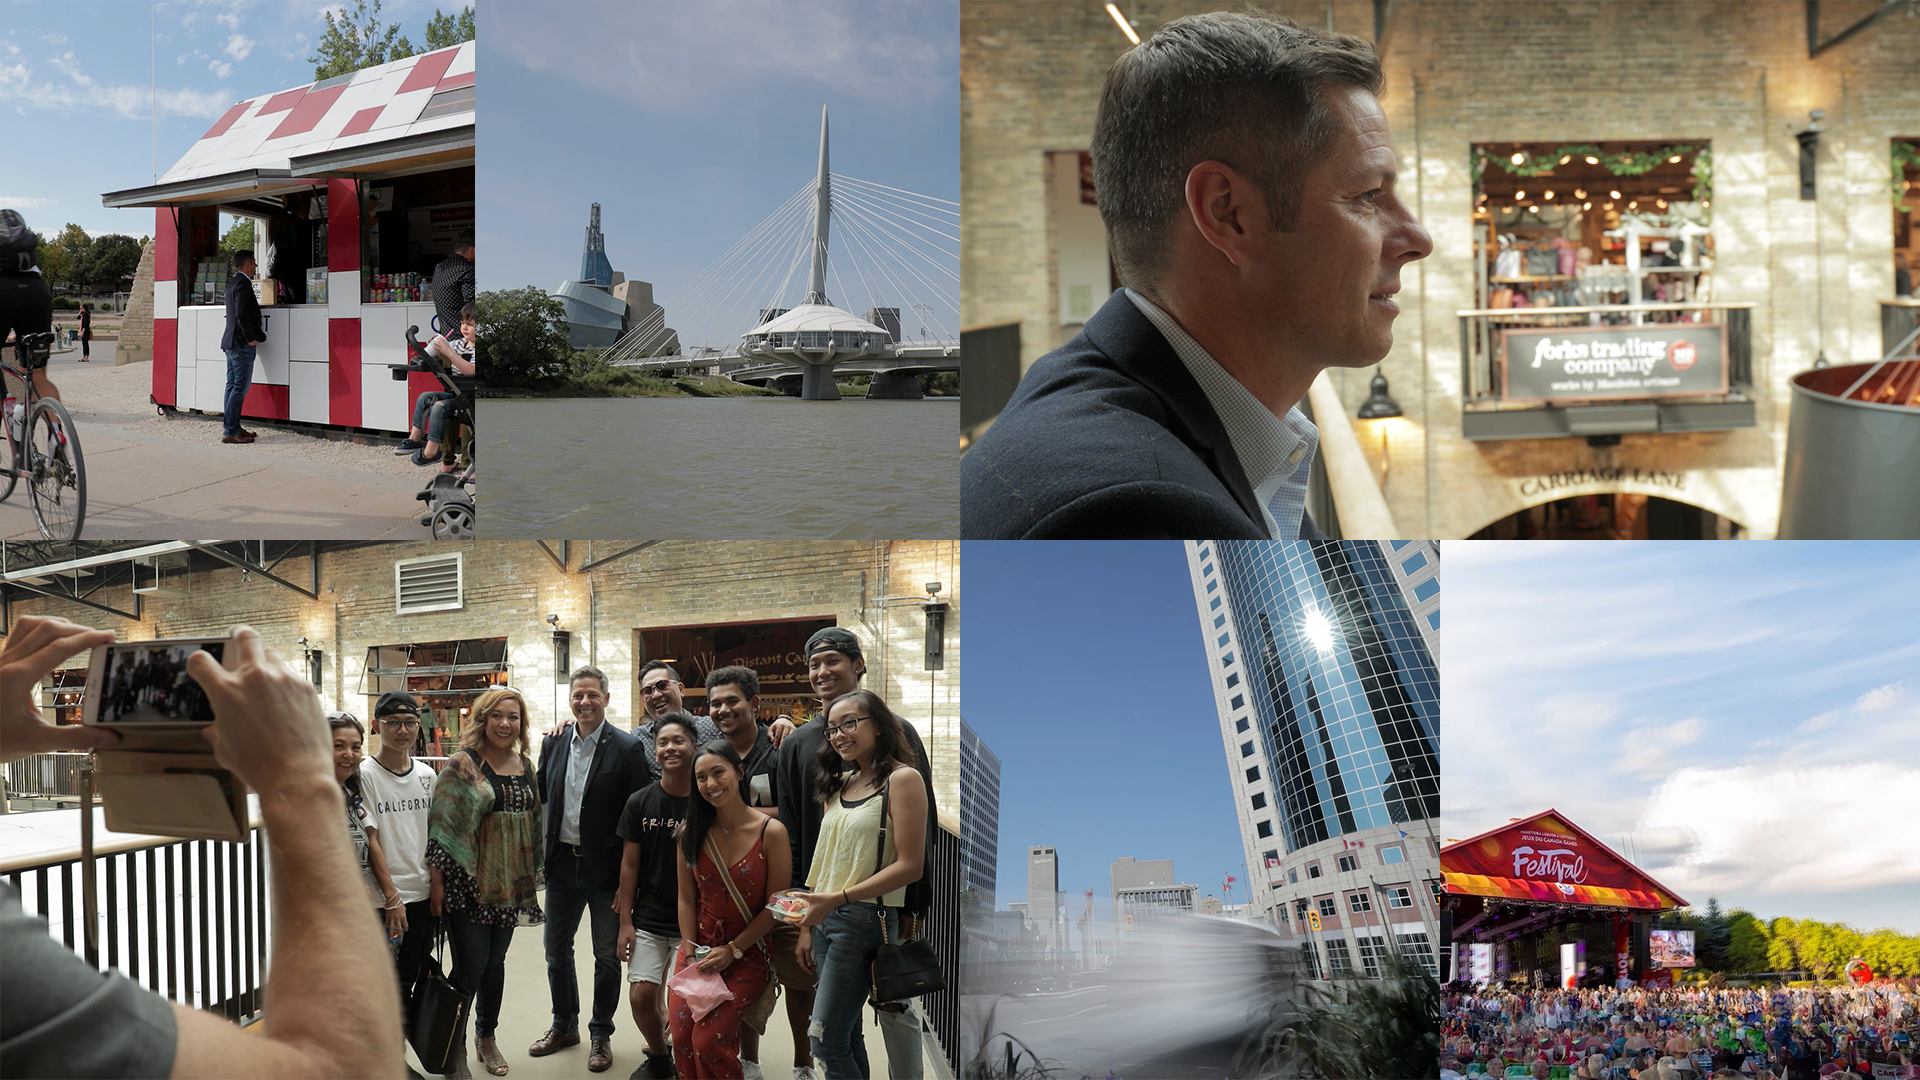 A collage of style frame images, featuring Mayor Bryan Bowman at the Forks, a skyline of the Forks, a group of people taking a photo with Bryan Bowman, an image of a downtown Winnipeg skyscraper, and a Winnipeg festival image.